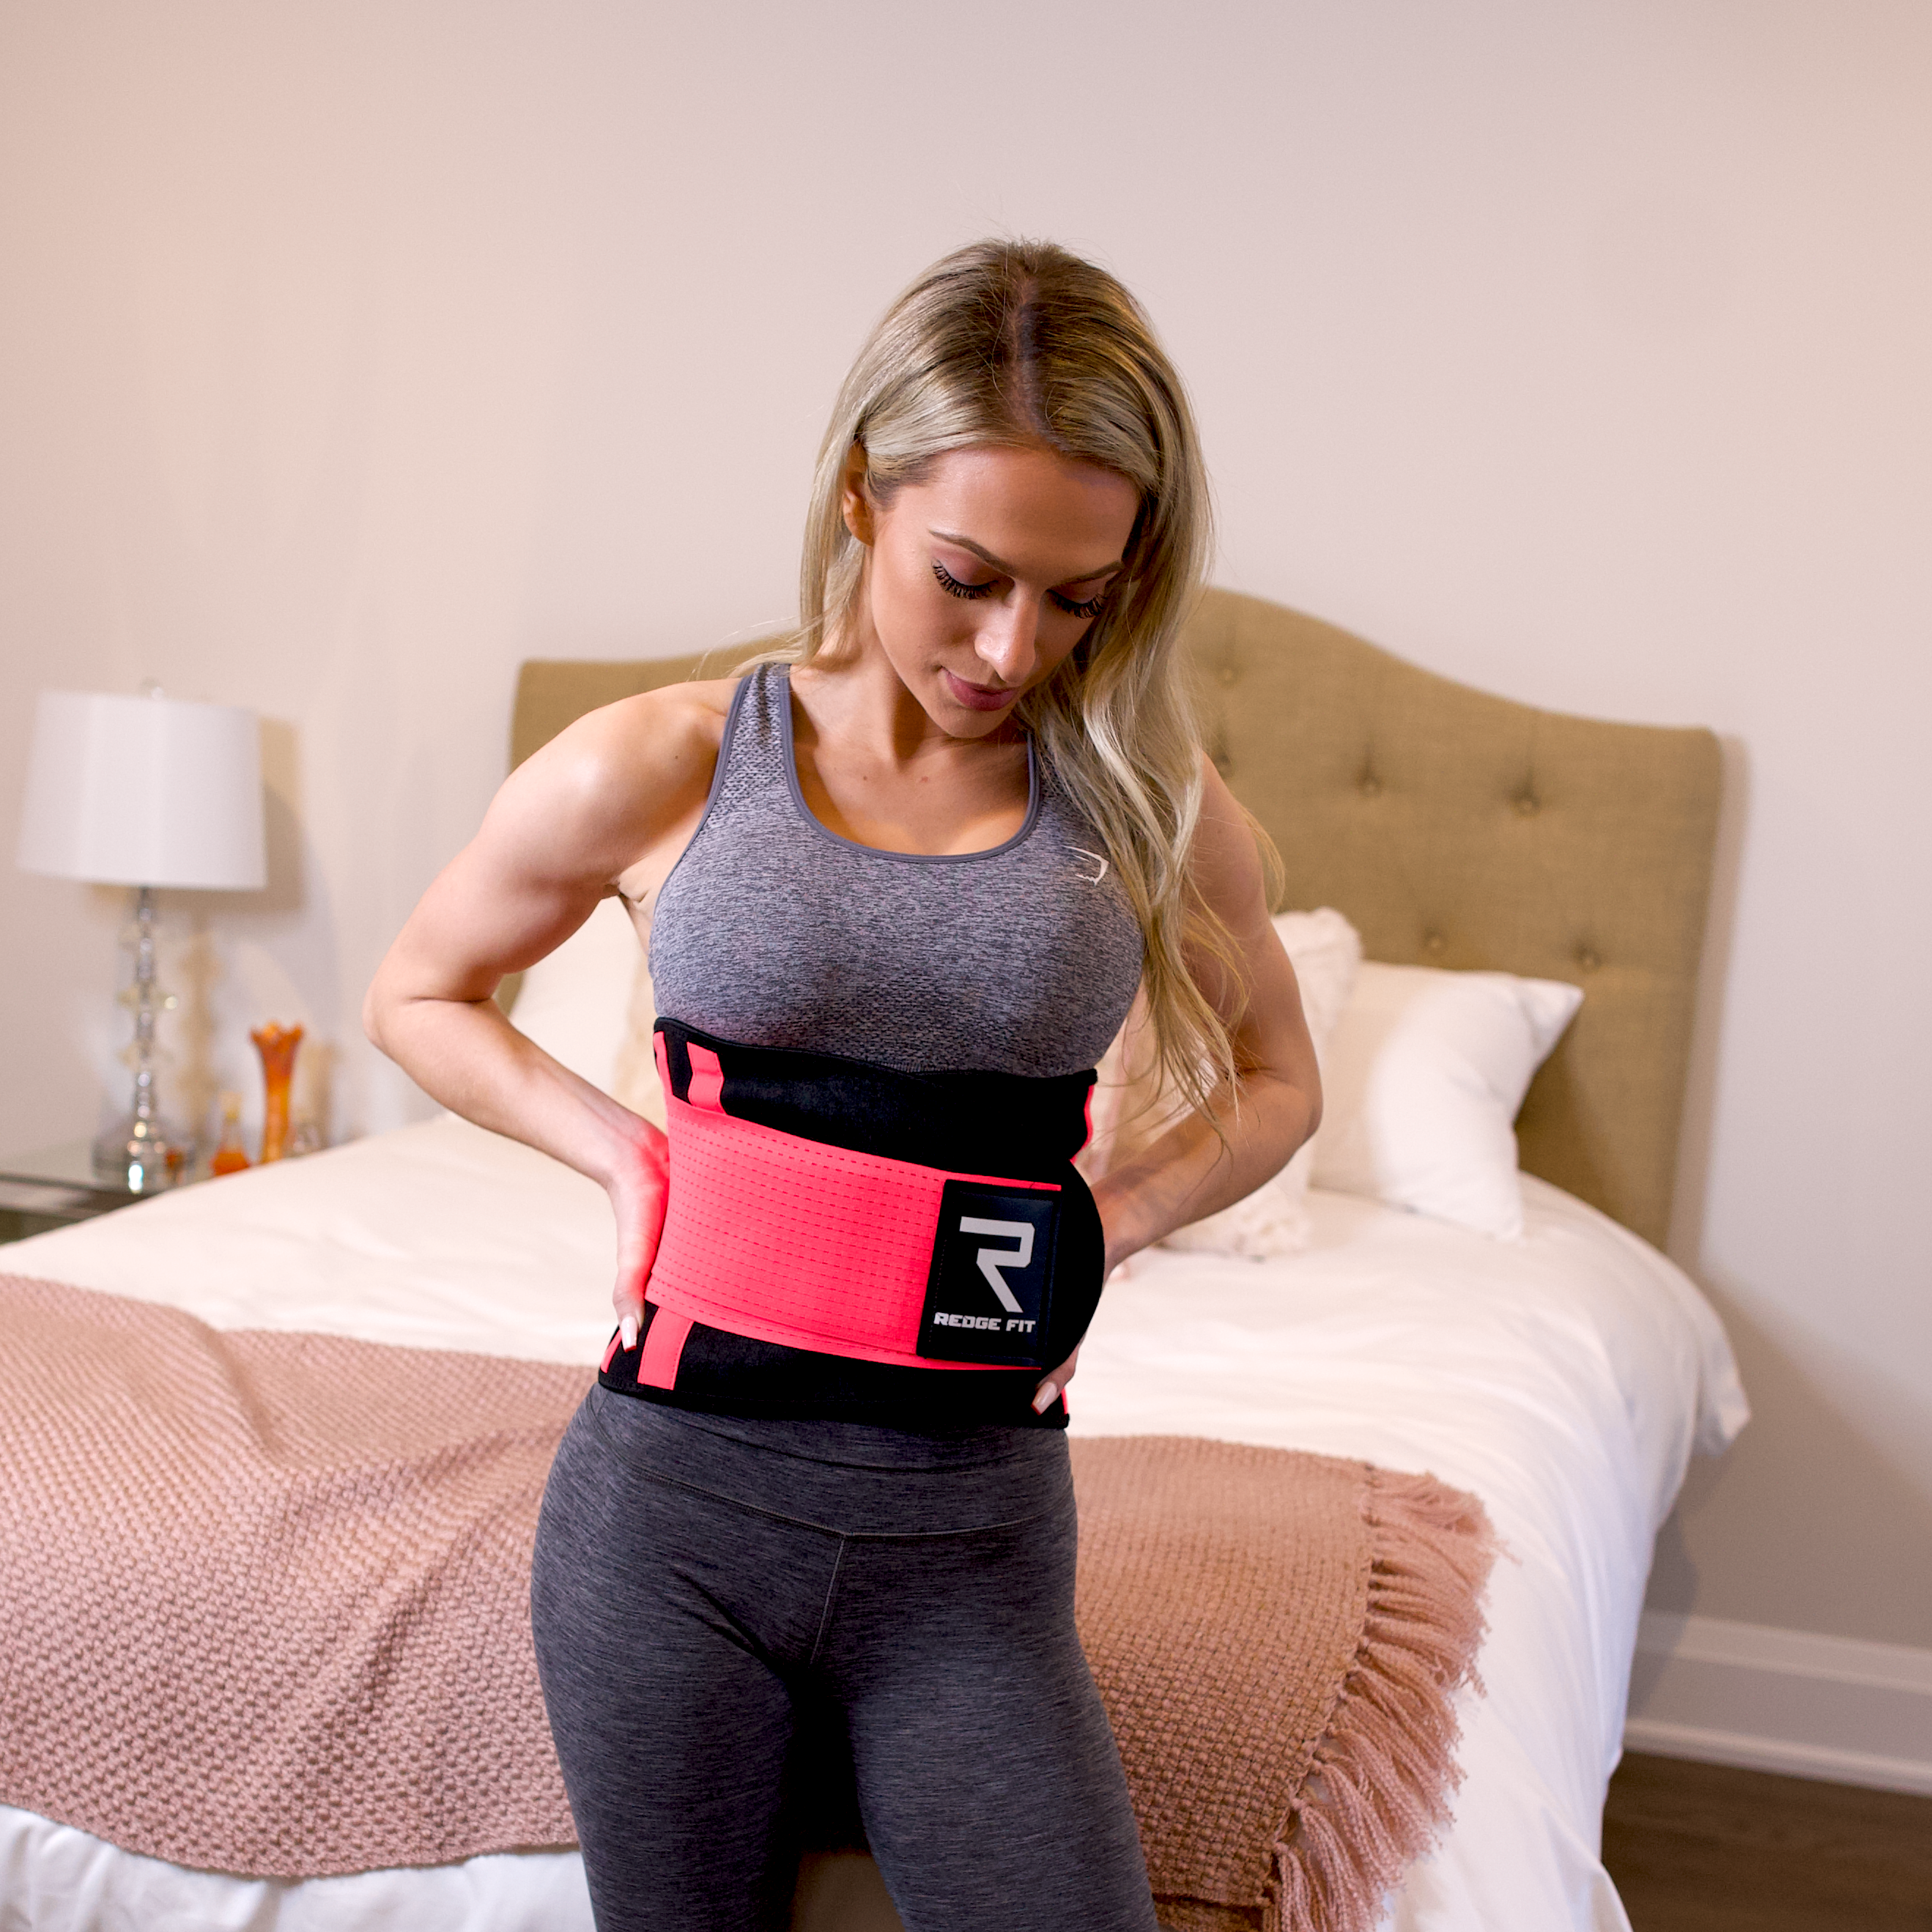 Woman modeling the Redge Fit Waist Shaper Size Chart: Size Waistline (Inches) Width (Inches) XS 31.5 8.8 S 35.5 8.8 M 39.5 8.8 L 43.5 8.8 XL 47 8.8 XXL 51 8.8 Available at https://www.getredge.com/products/redge-waist-shaper-sweat-belt-women